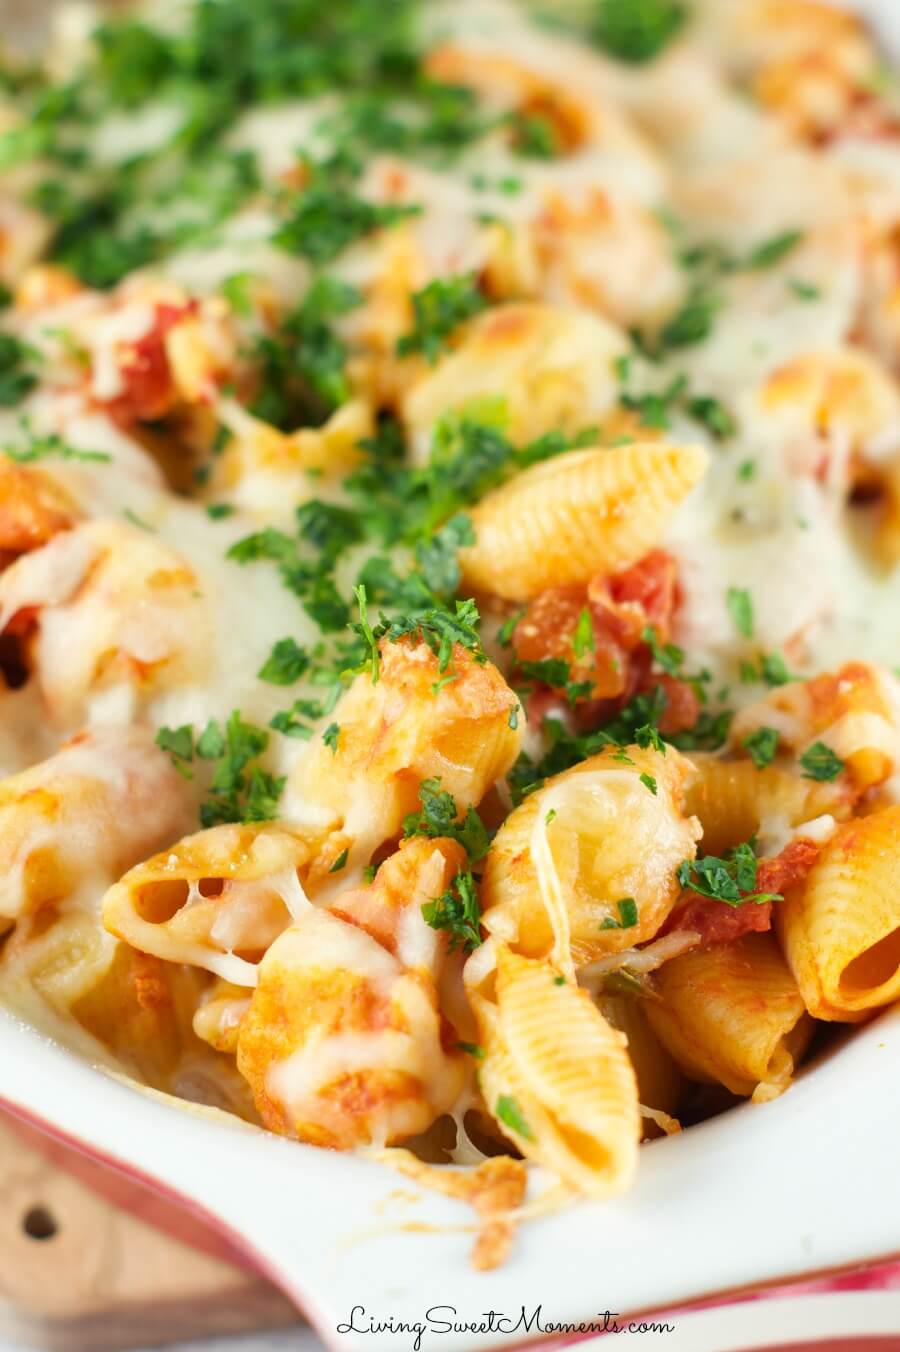 Cheesy Chicken Casserole - Only 6 ingredients. Made with pasta, tomato and cheese. This easy quick dinner recipe is delicious, hearty and oh so satisfying.